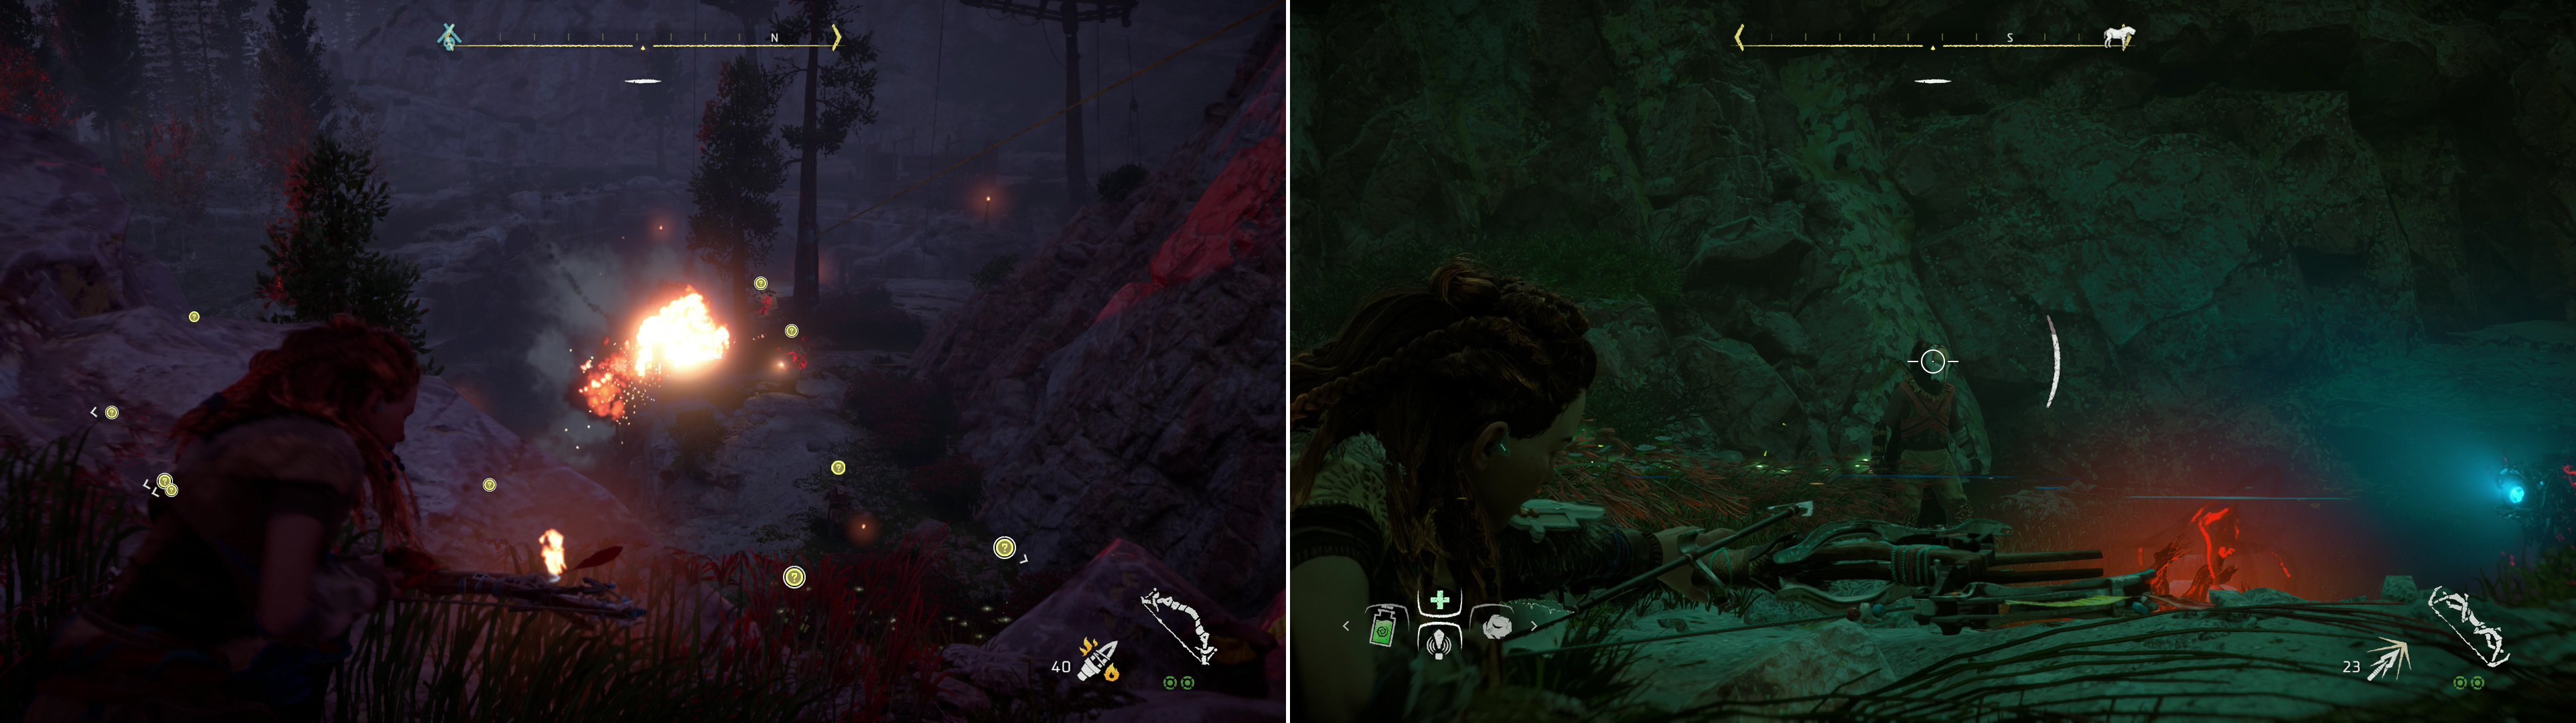 Take advantage of Blaze barrels to eliminate foes (left), or take a somewhat more direct approach (right).